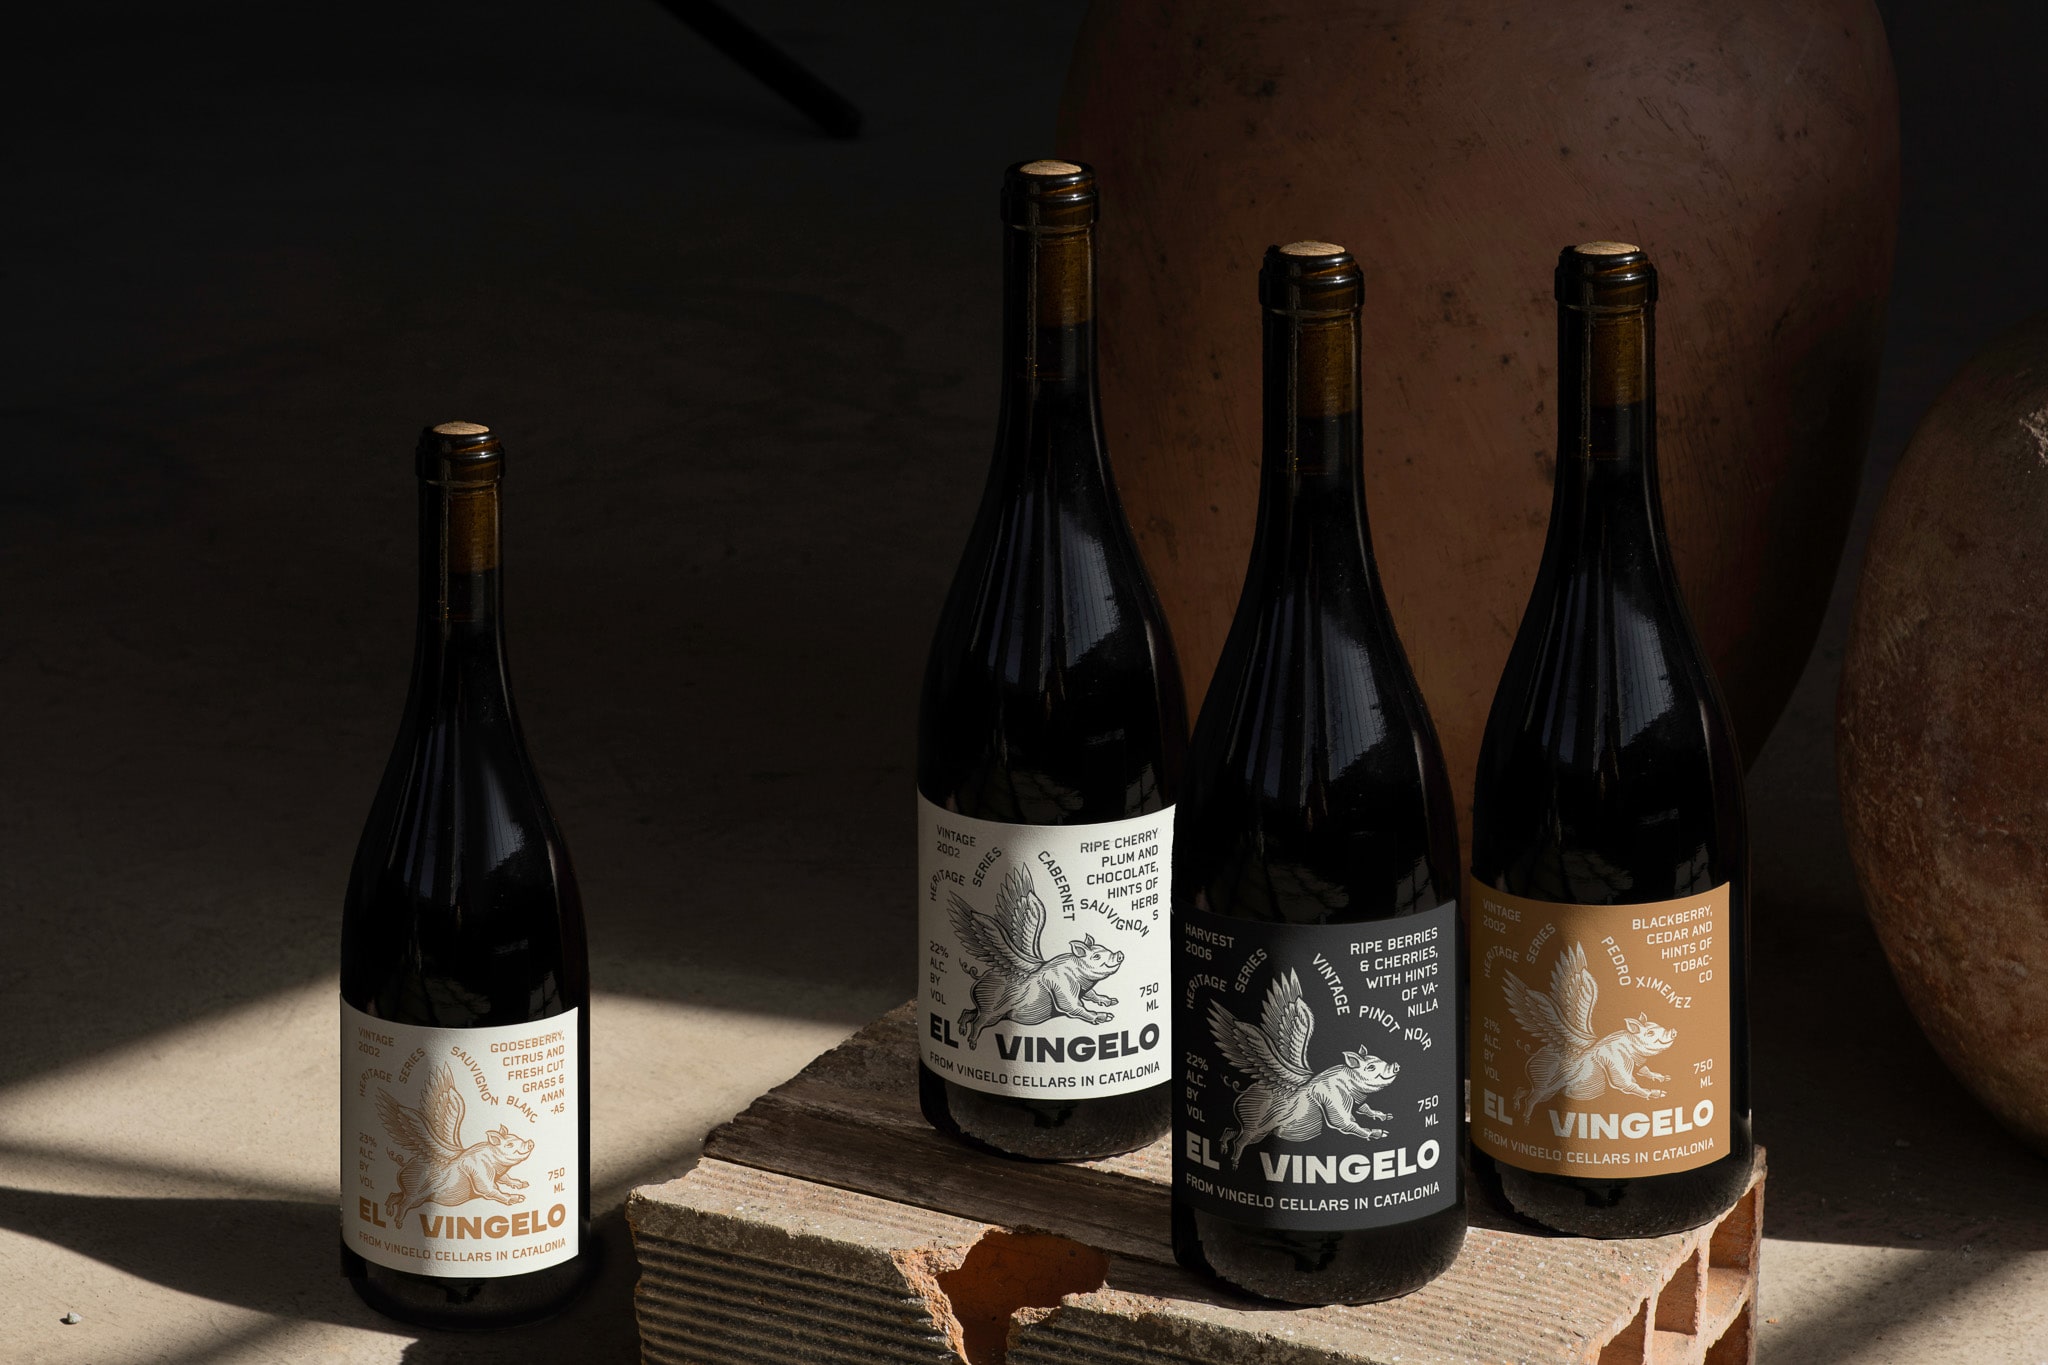 El Angelo Winery’s Distinctive Label with Bold Typography and Playful Illustrations by Ceren Burcu Turkan